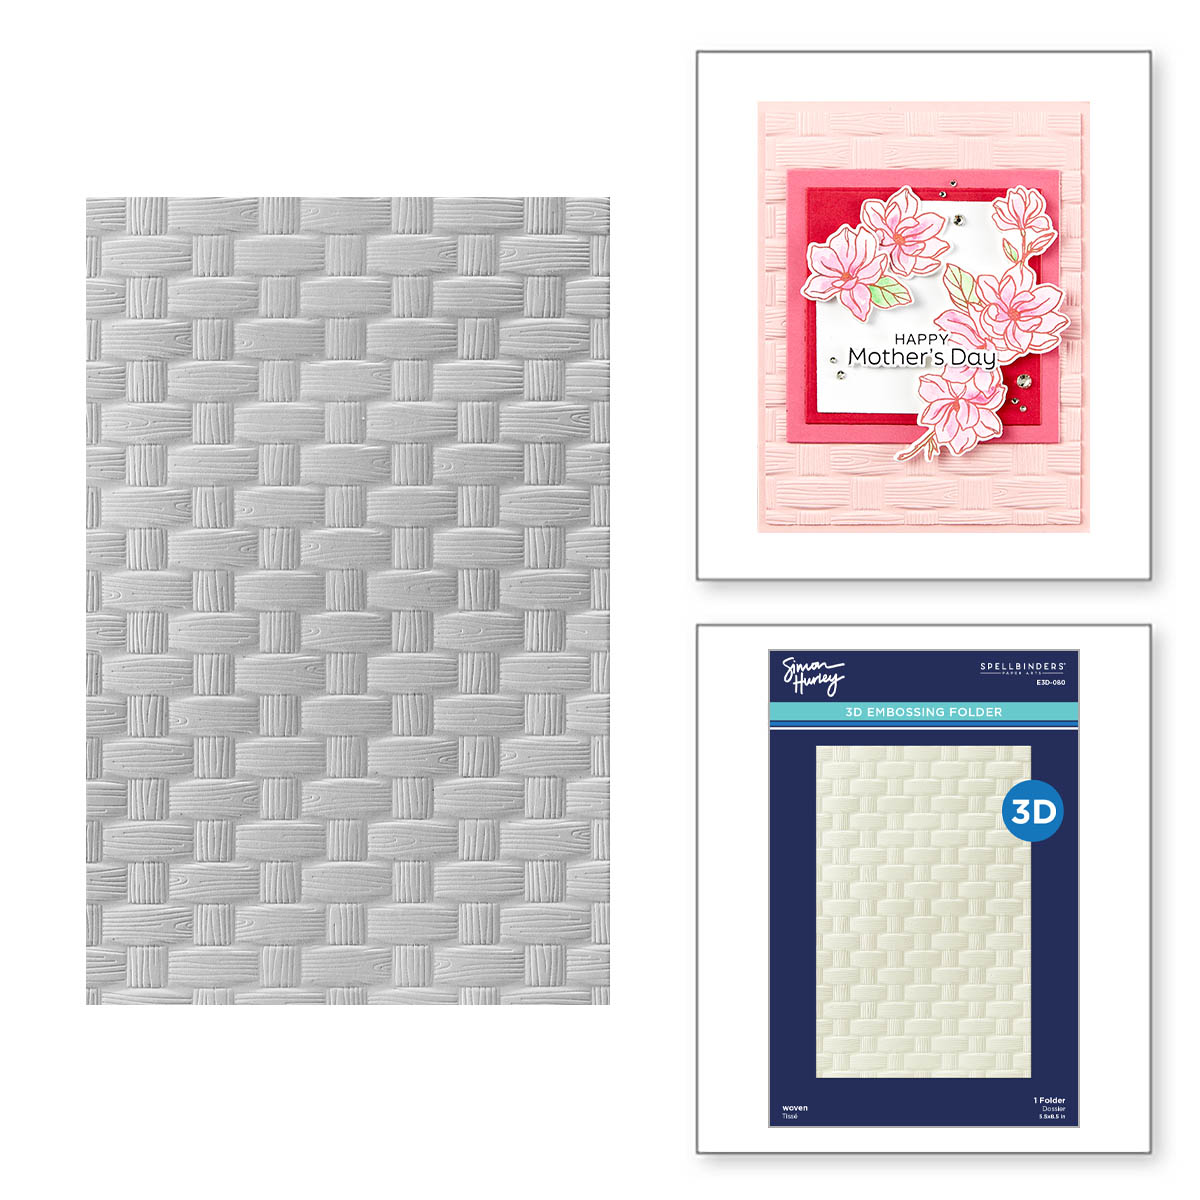 Spellbinders Woven 3D Embossing Folder From the Spring Sampler Collection By Simony Hurley